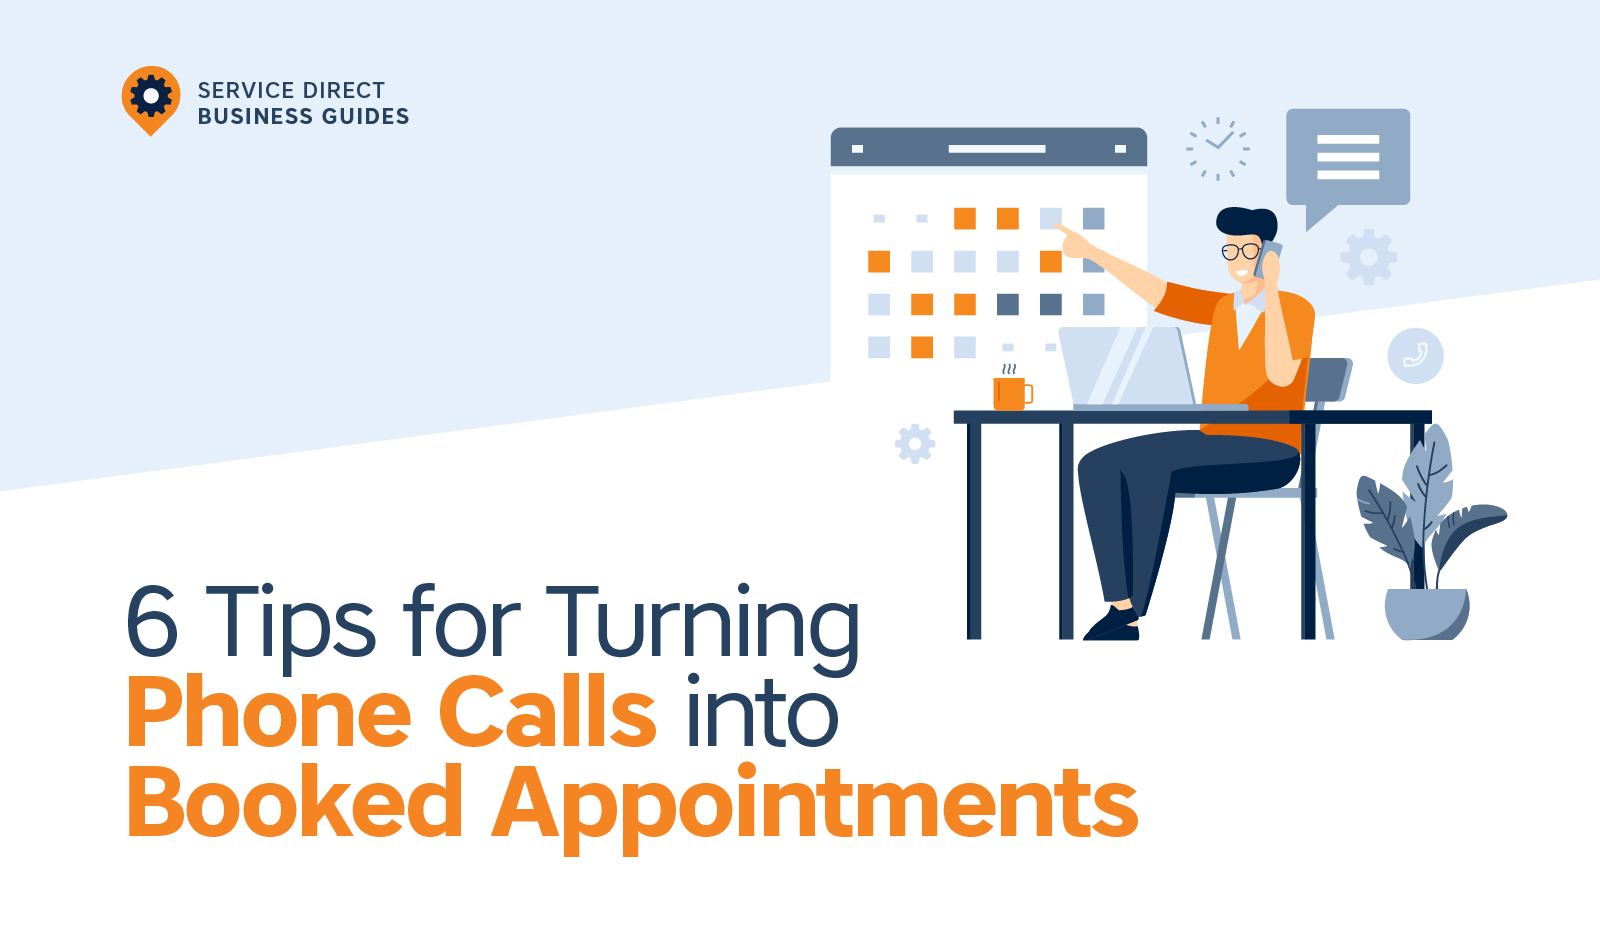 6 Tips to Turn Phone Calls into Booked Appointments